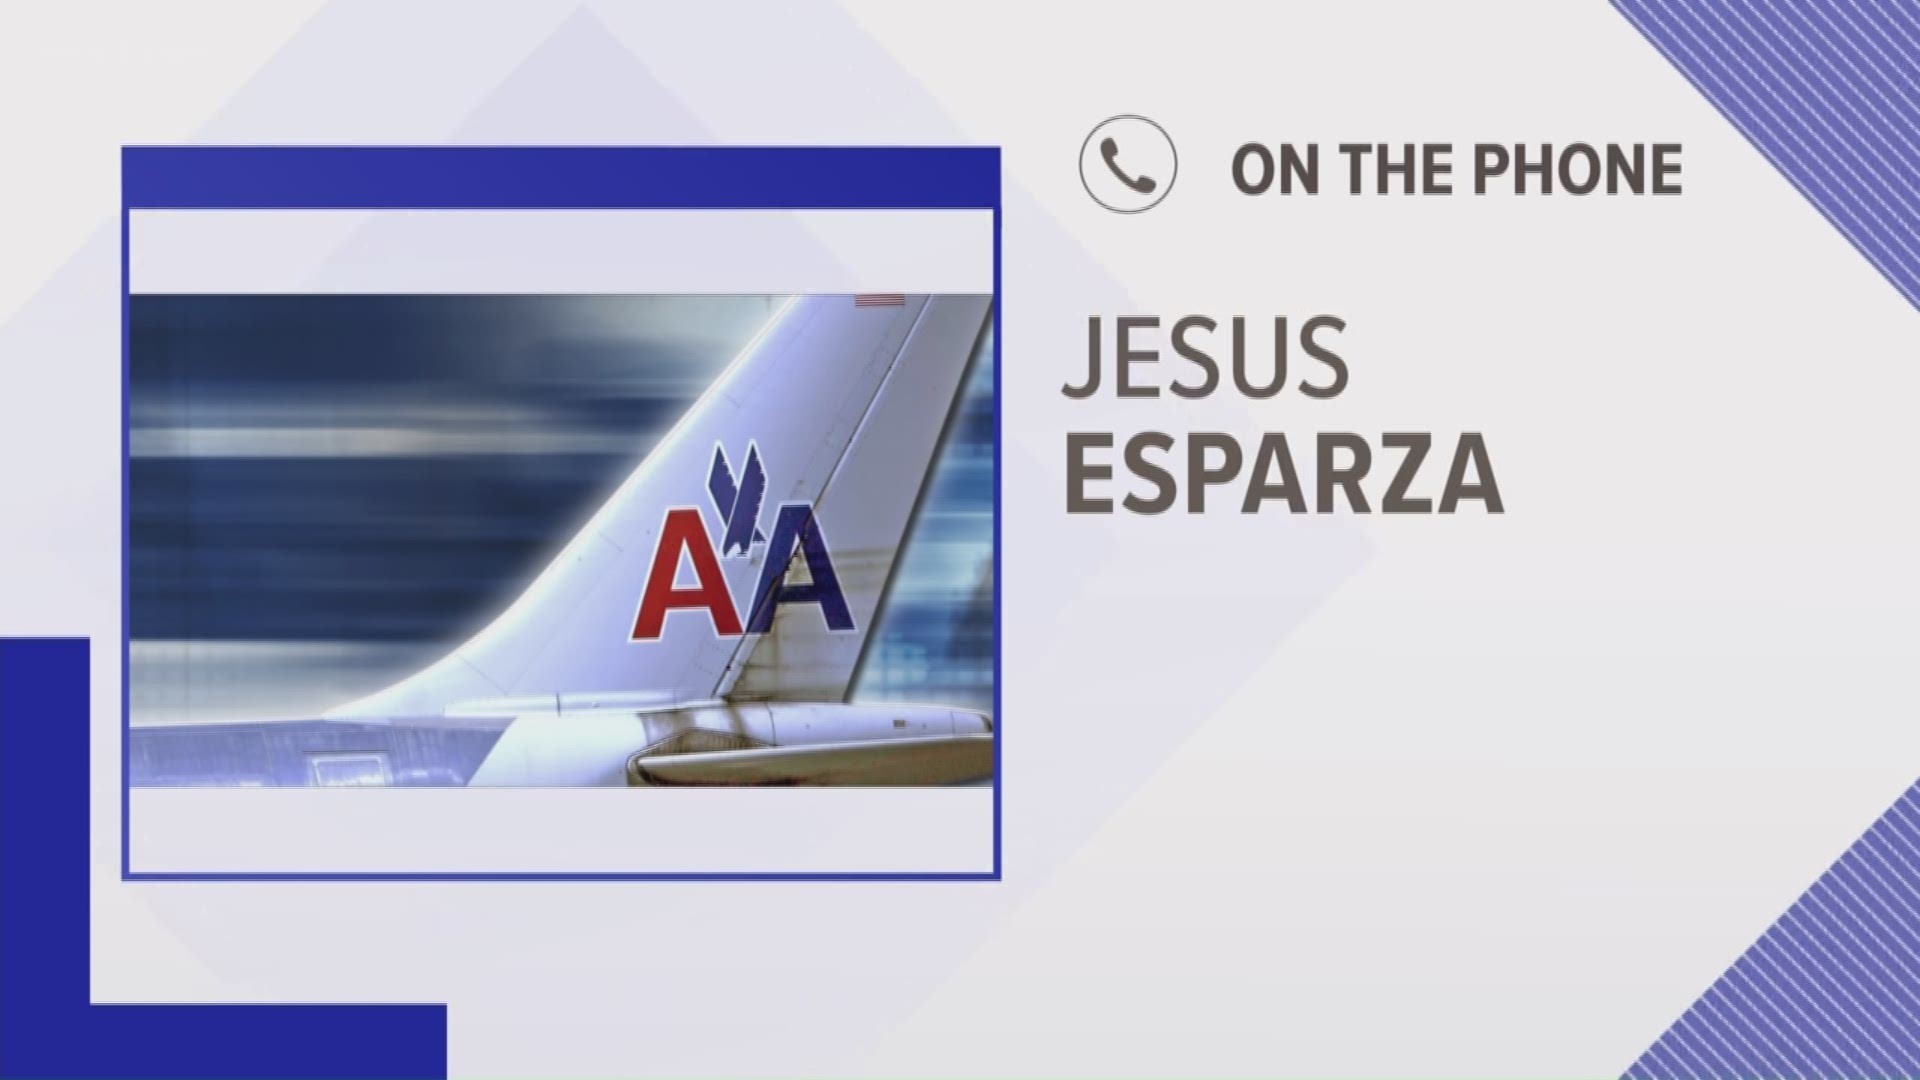 An emergency plane landing for a flight from San Antonio to Phoenix. We have a passenger from that plane on the phone -- Jesus Esperaza -- on the phone now.